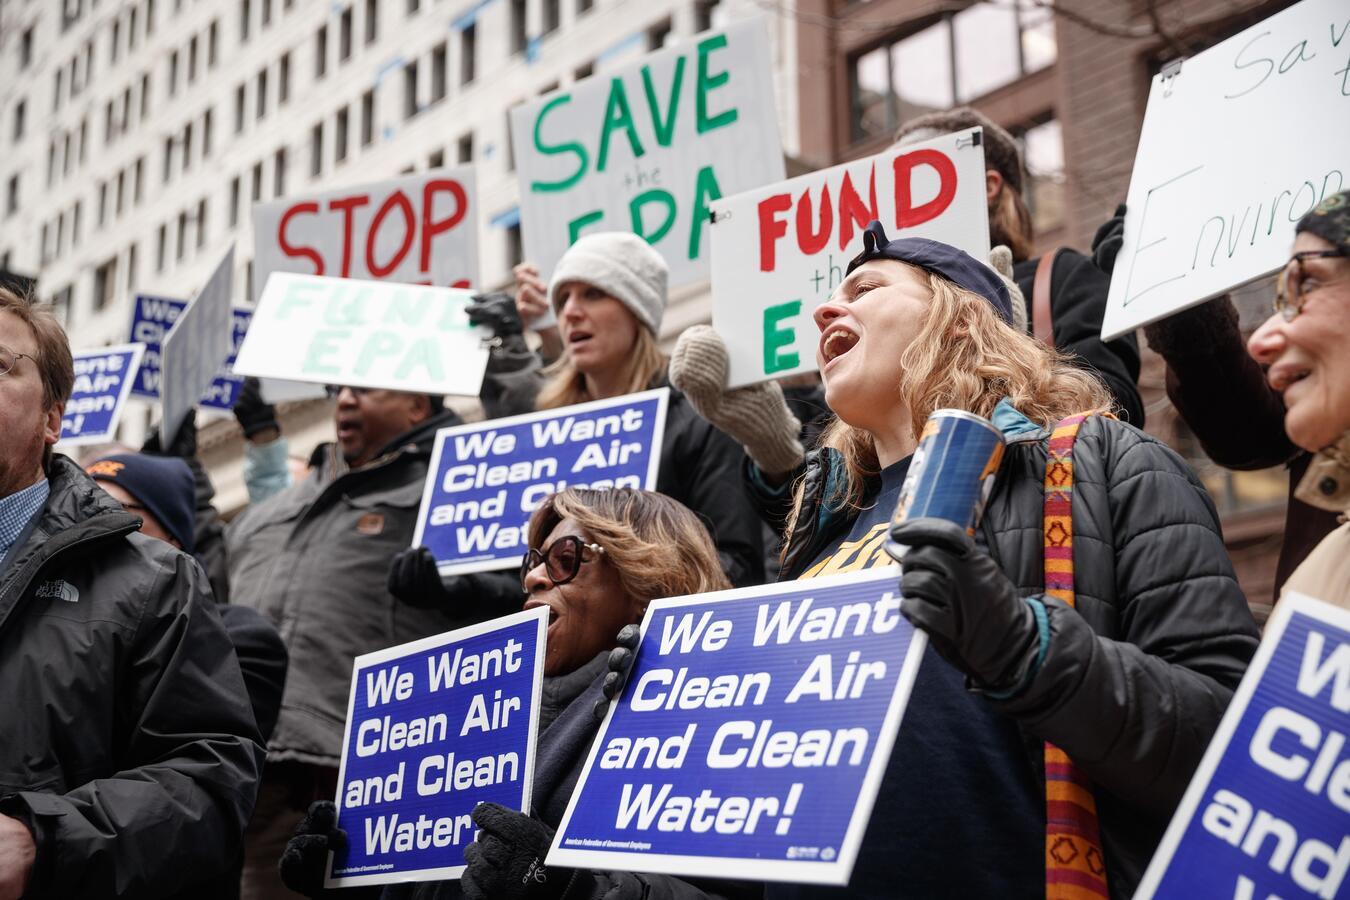 A group of people hold signs that read "We Want Clean Air and Clean Water!"